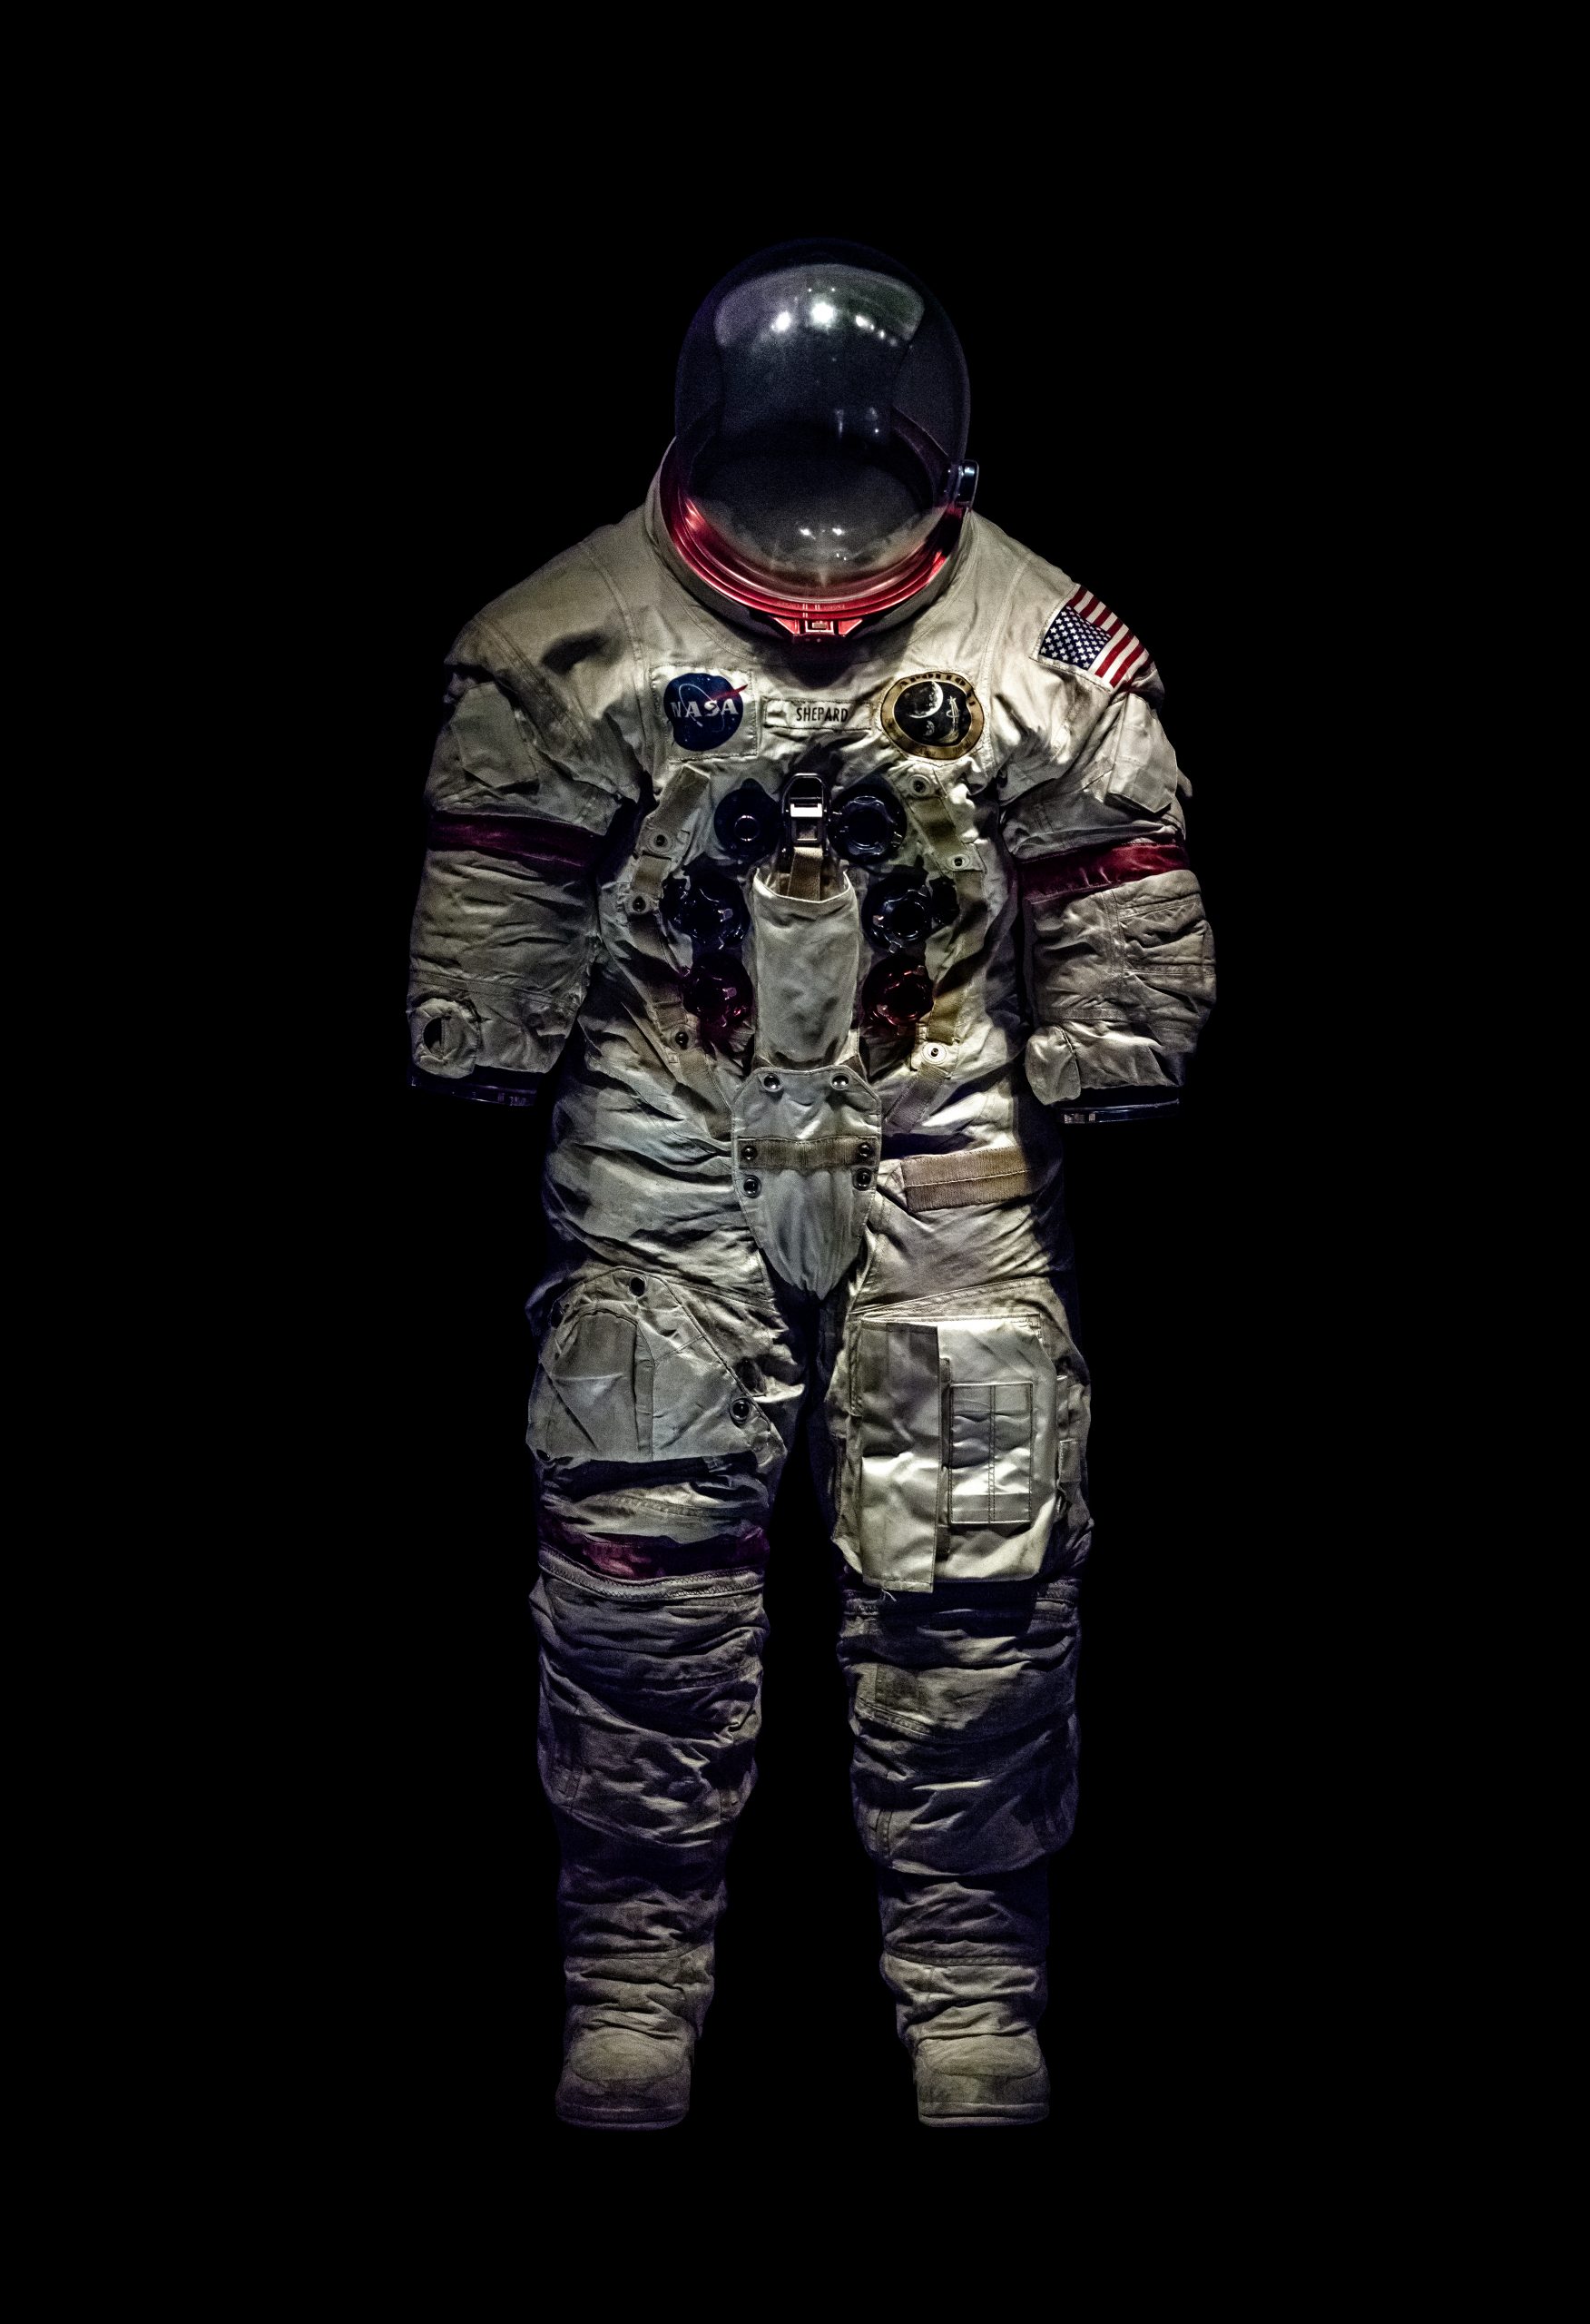 Mike Meyer, „shepard space suit apollo , 14 nasa cape canaveral“